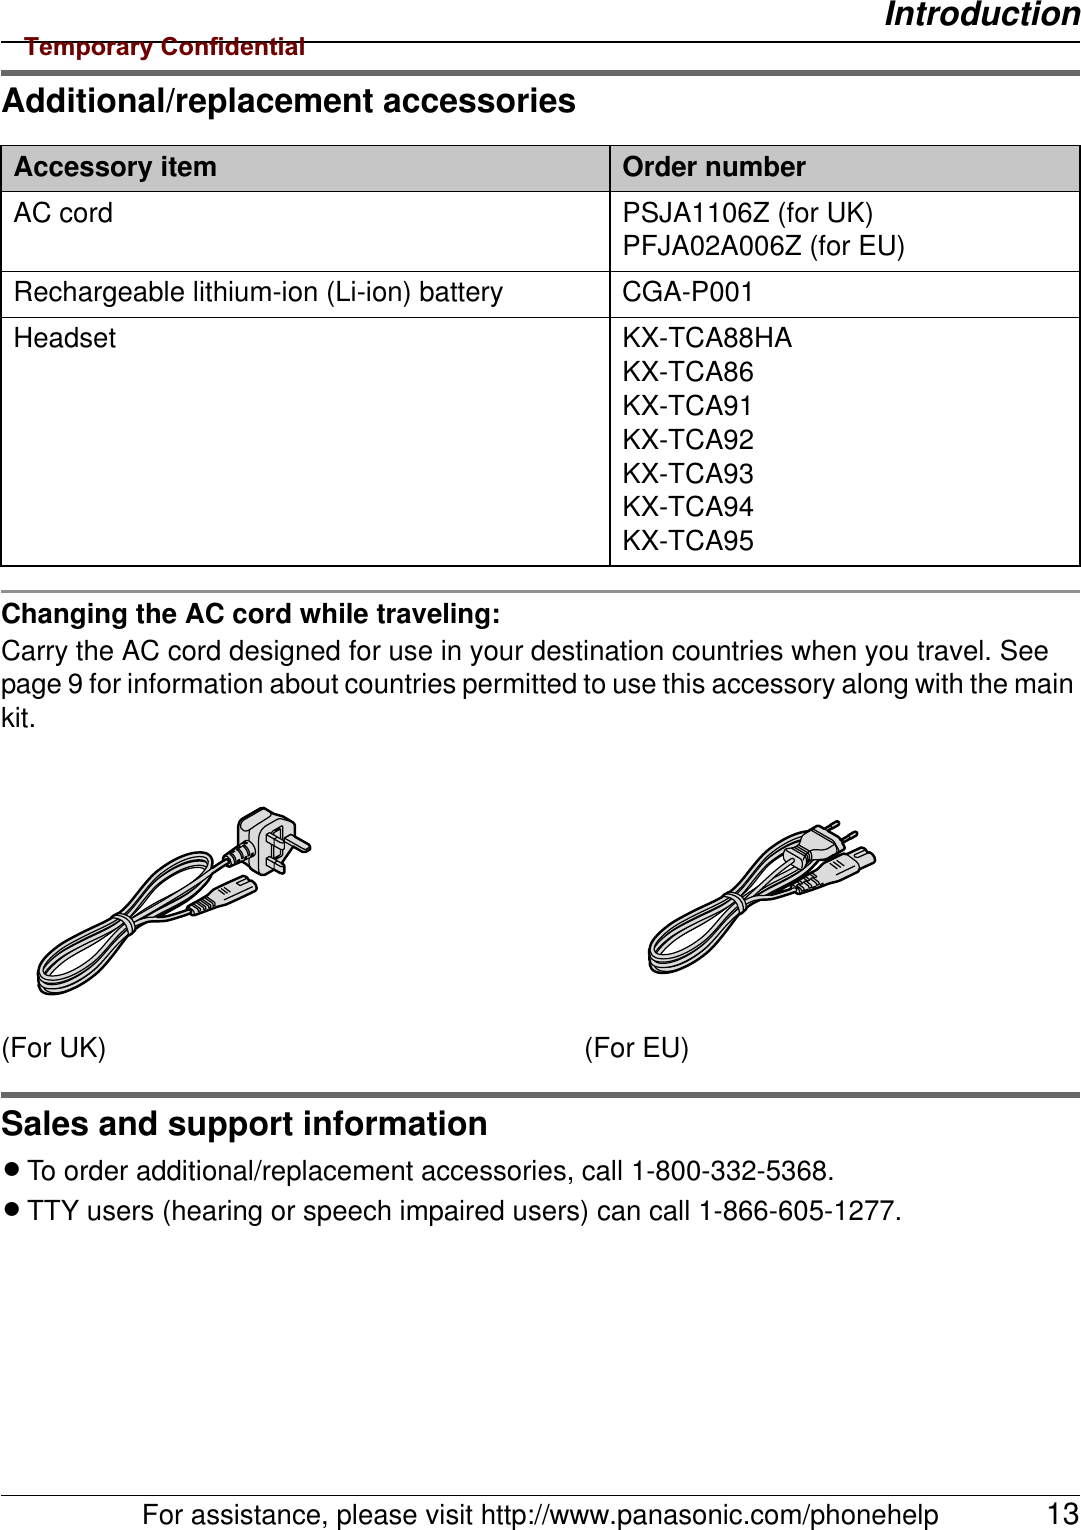 IntroductionFor assistance, please visit http://www.panasonic.com/phonehelp 13Additional/replacement accessoriesChanging the AC cord while traveling:Carry the AC cord designed for use in your destination countries when you travel. See page 9 for information about countries permitted to use this accessory along with the main kit.Sales and support informationLTo order additional/replacement accessories, call 1-800-332-5368.LTTY users (hearing or speech impaired users) can call 1-866-605-1277.Accessory item Order numberAC cord PSJA1106Z (for UK)PFJA02A006Z (for EU)Rechargeable lithium-ion (Li-ion) battery CGA-P001Headset KX-TCA88HAKX-TCA86KX-TCA91KX-TCA92KX-TCA93KX-TCA94KX-TCA95(For UK) (For EU)Temporary Confidential